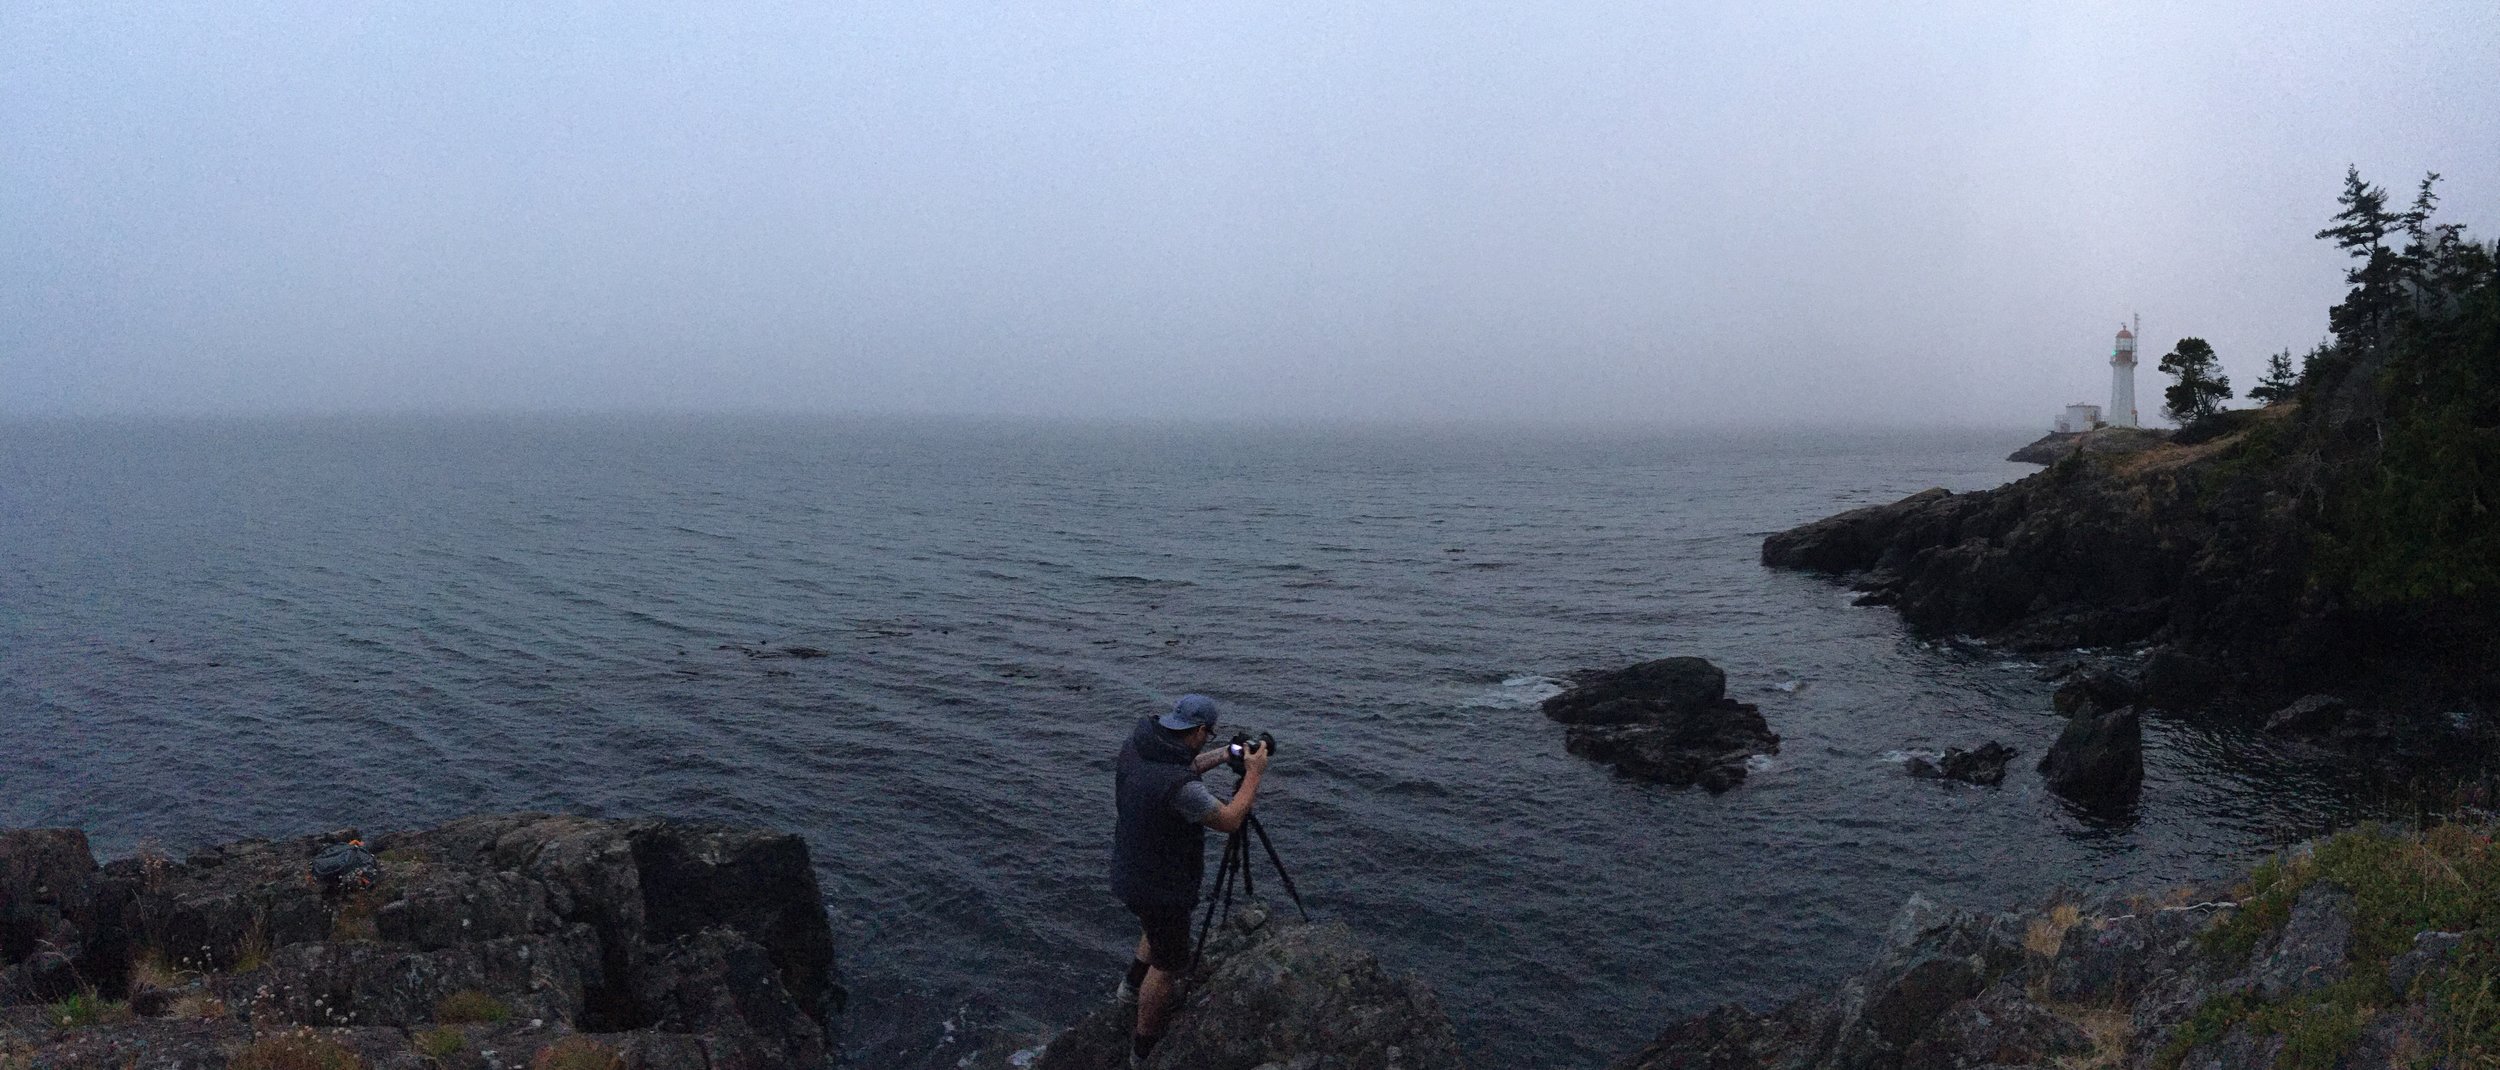  Shortly after capturing the first photo of the Lighthouse, the fog came rolling in fast and heavy.&nbsp; They sure don't call it "Fogust" for nothing! 